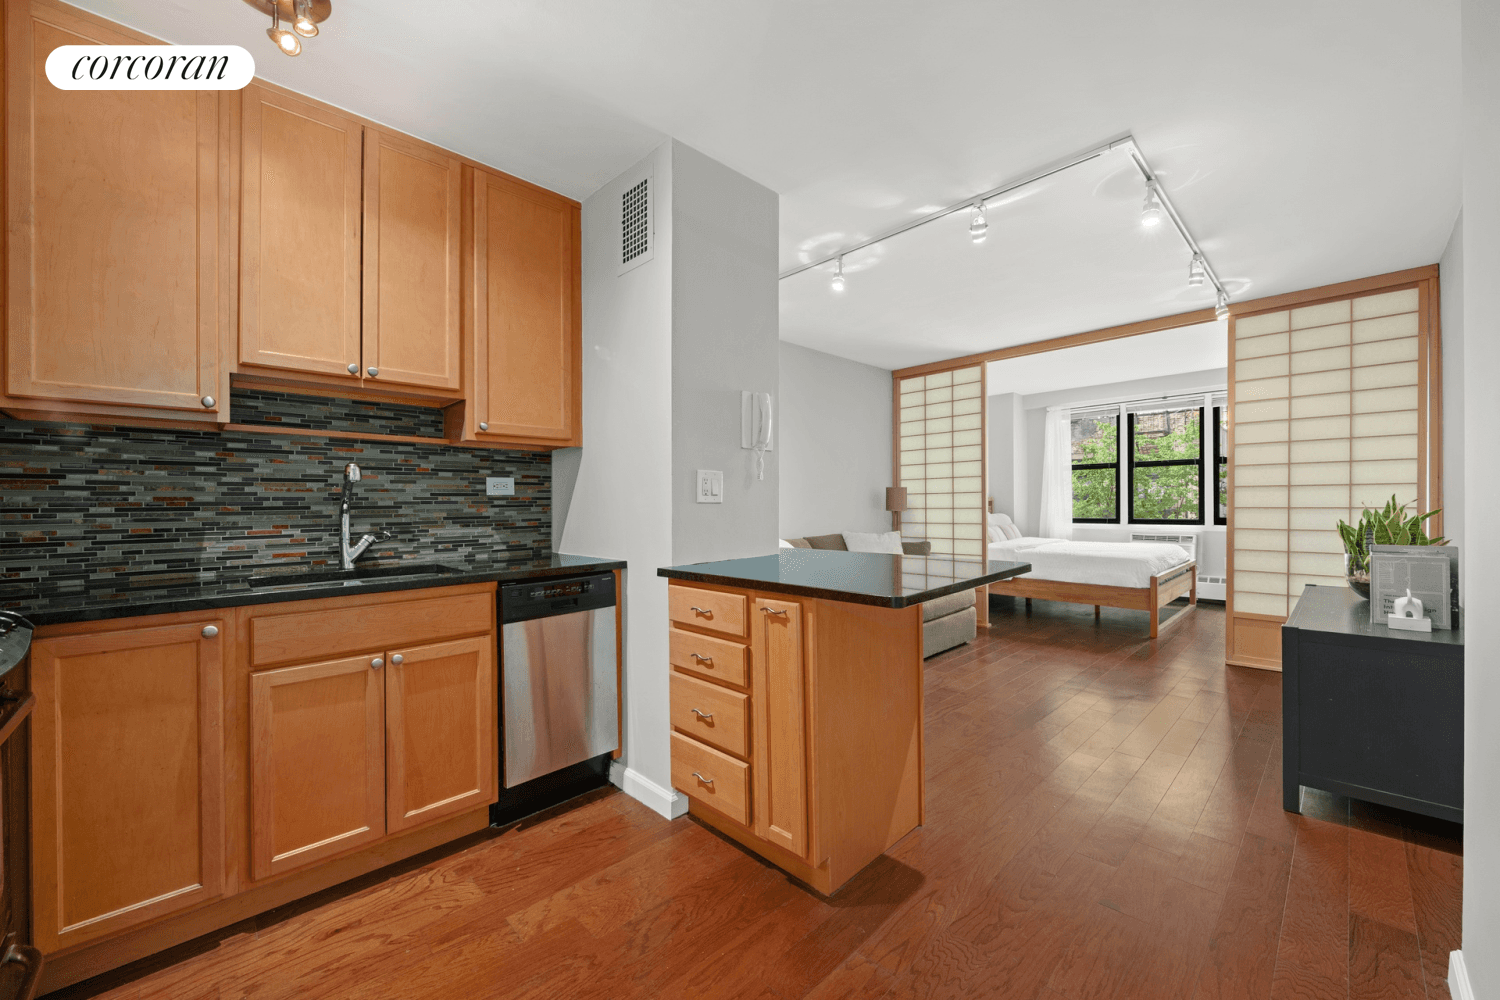 Step into apartment 6J, a stunning studio within Gramercy Arms, a beautifully maintained cooperative nestled among the charming surroundings of Irving Place, Gramercy Park, Stuyvesant Park, and Union Square Park.